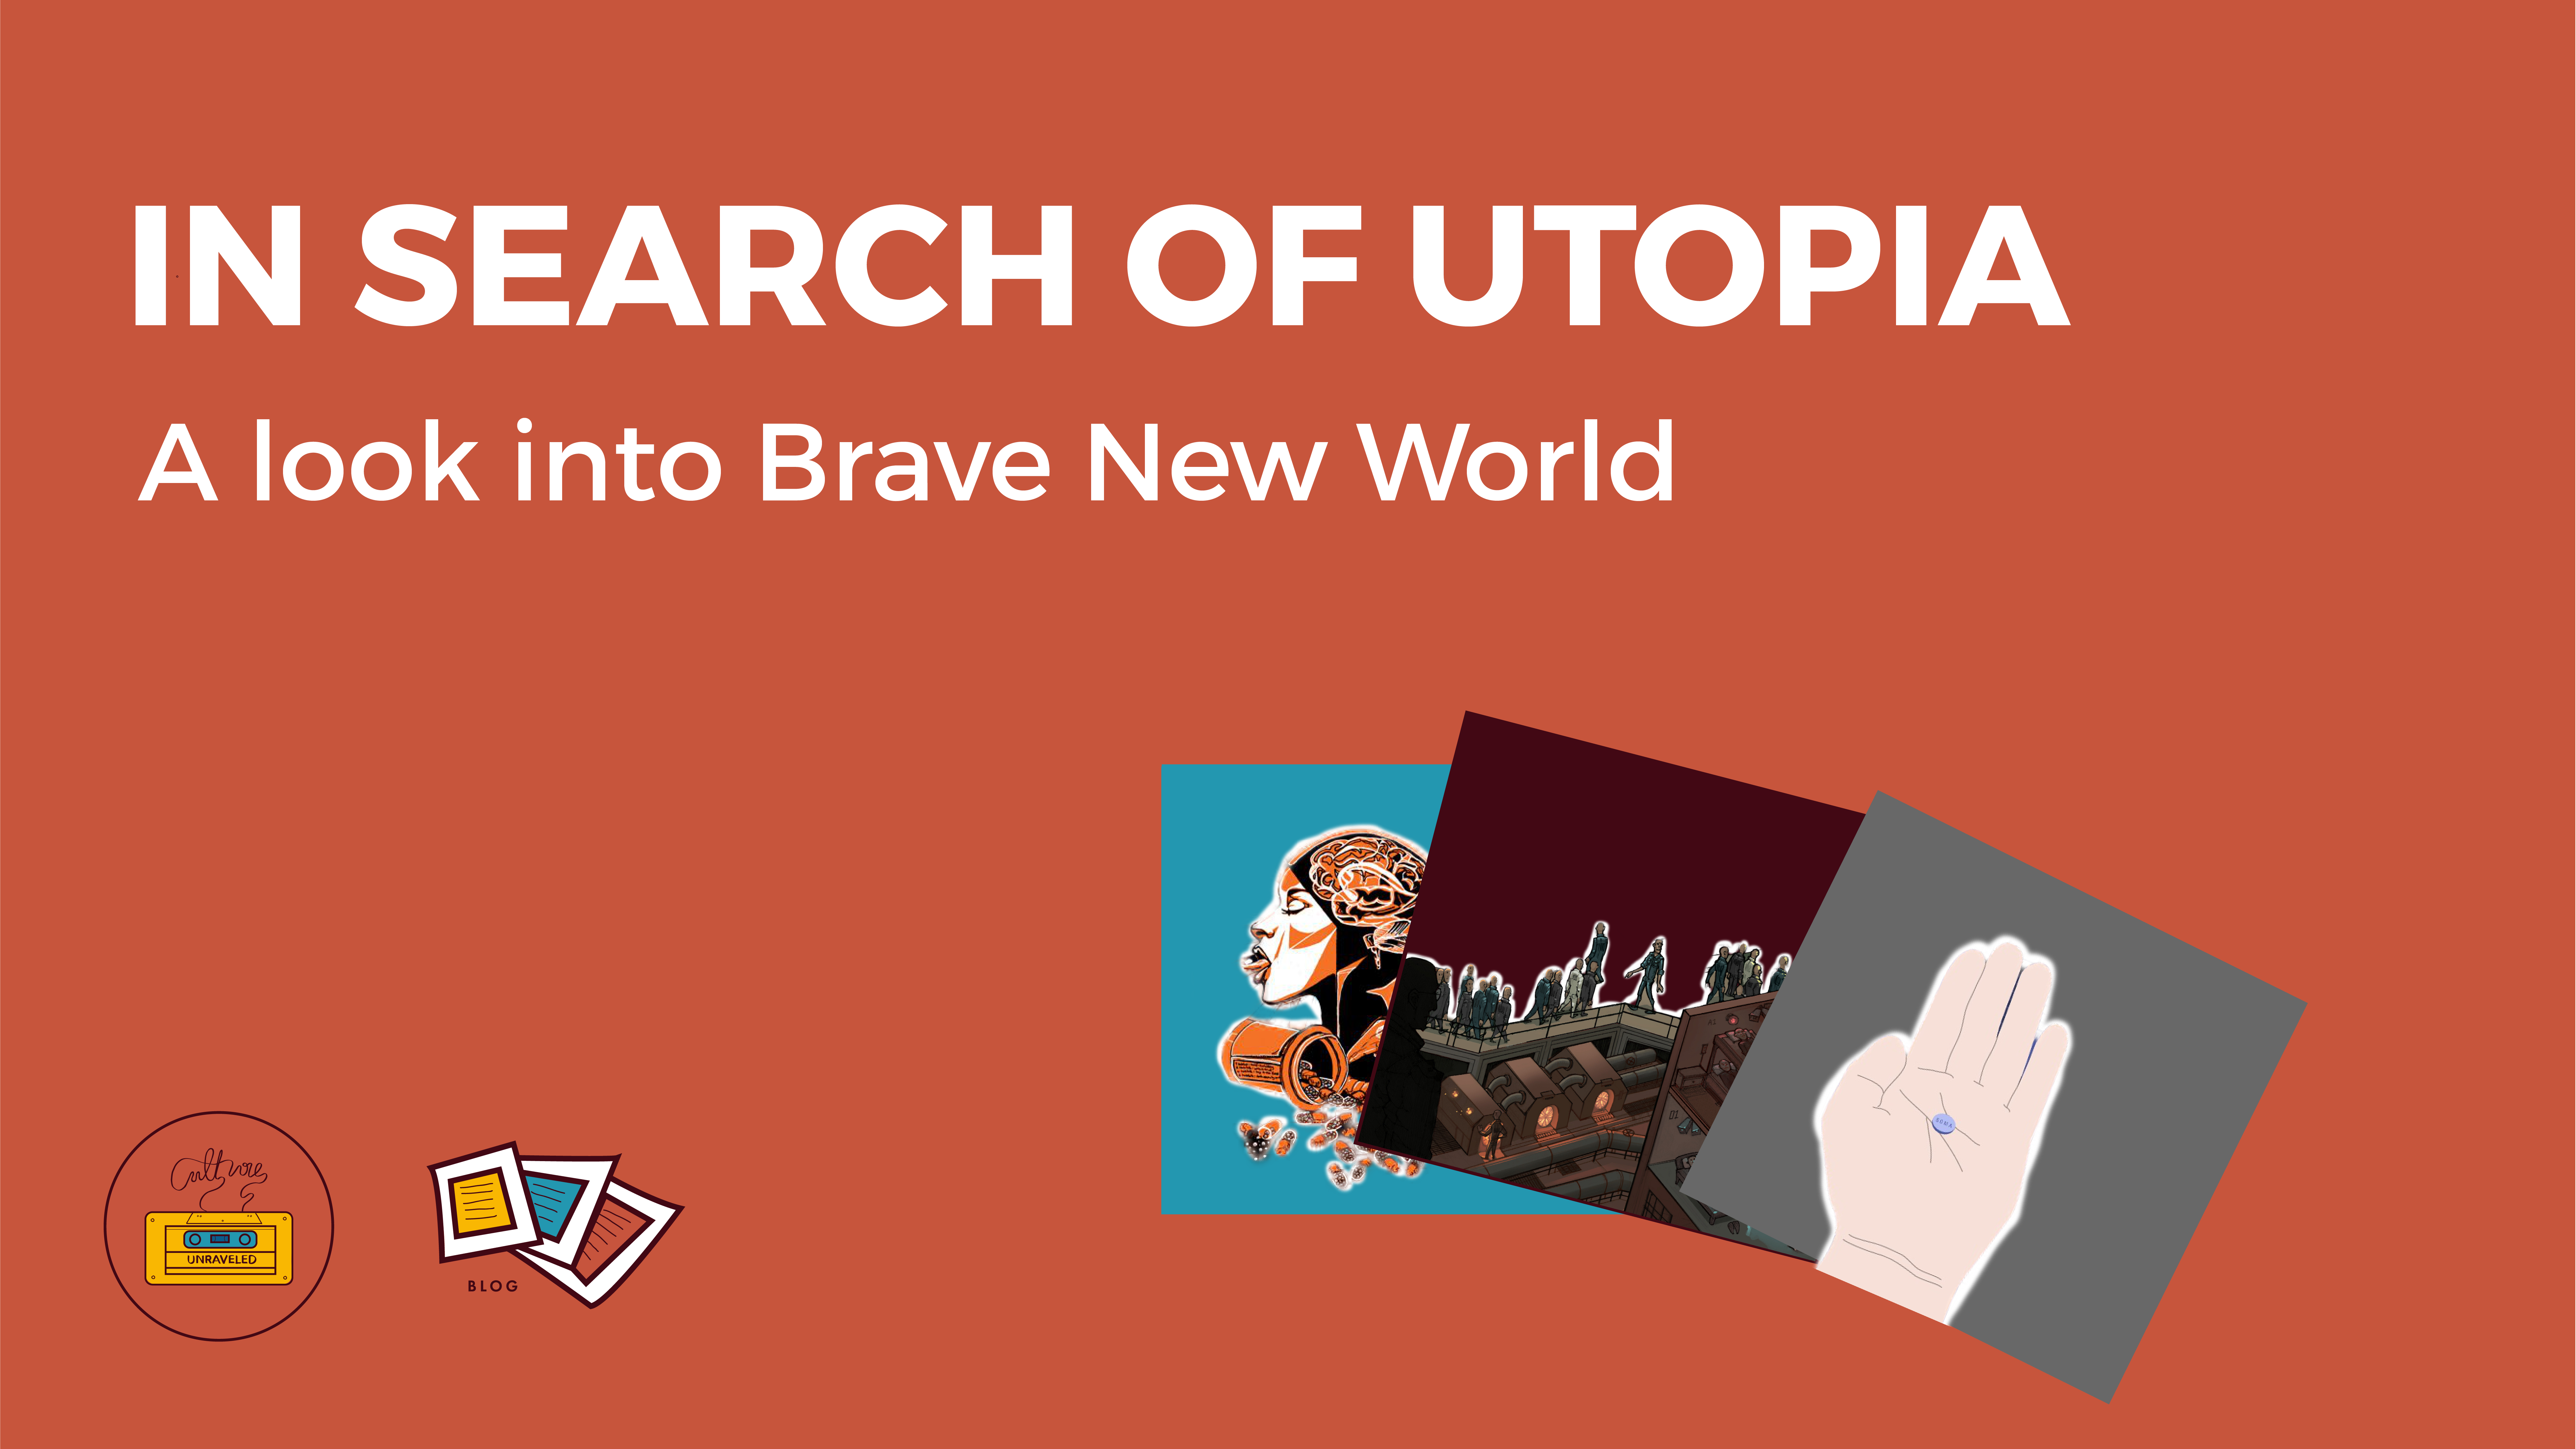 In Search of Utopia. A Look into Brave New World